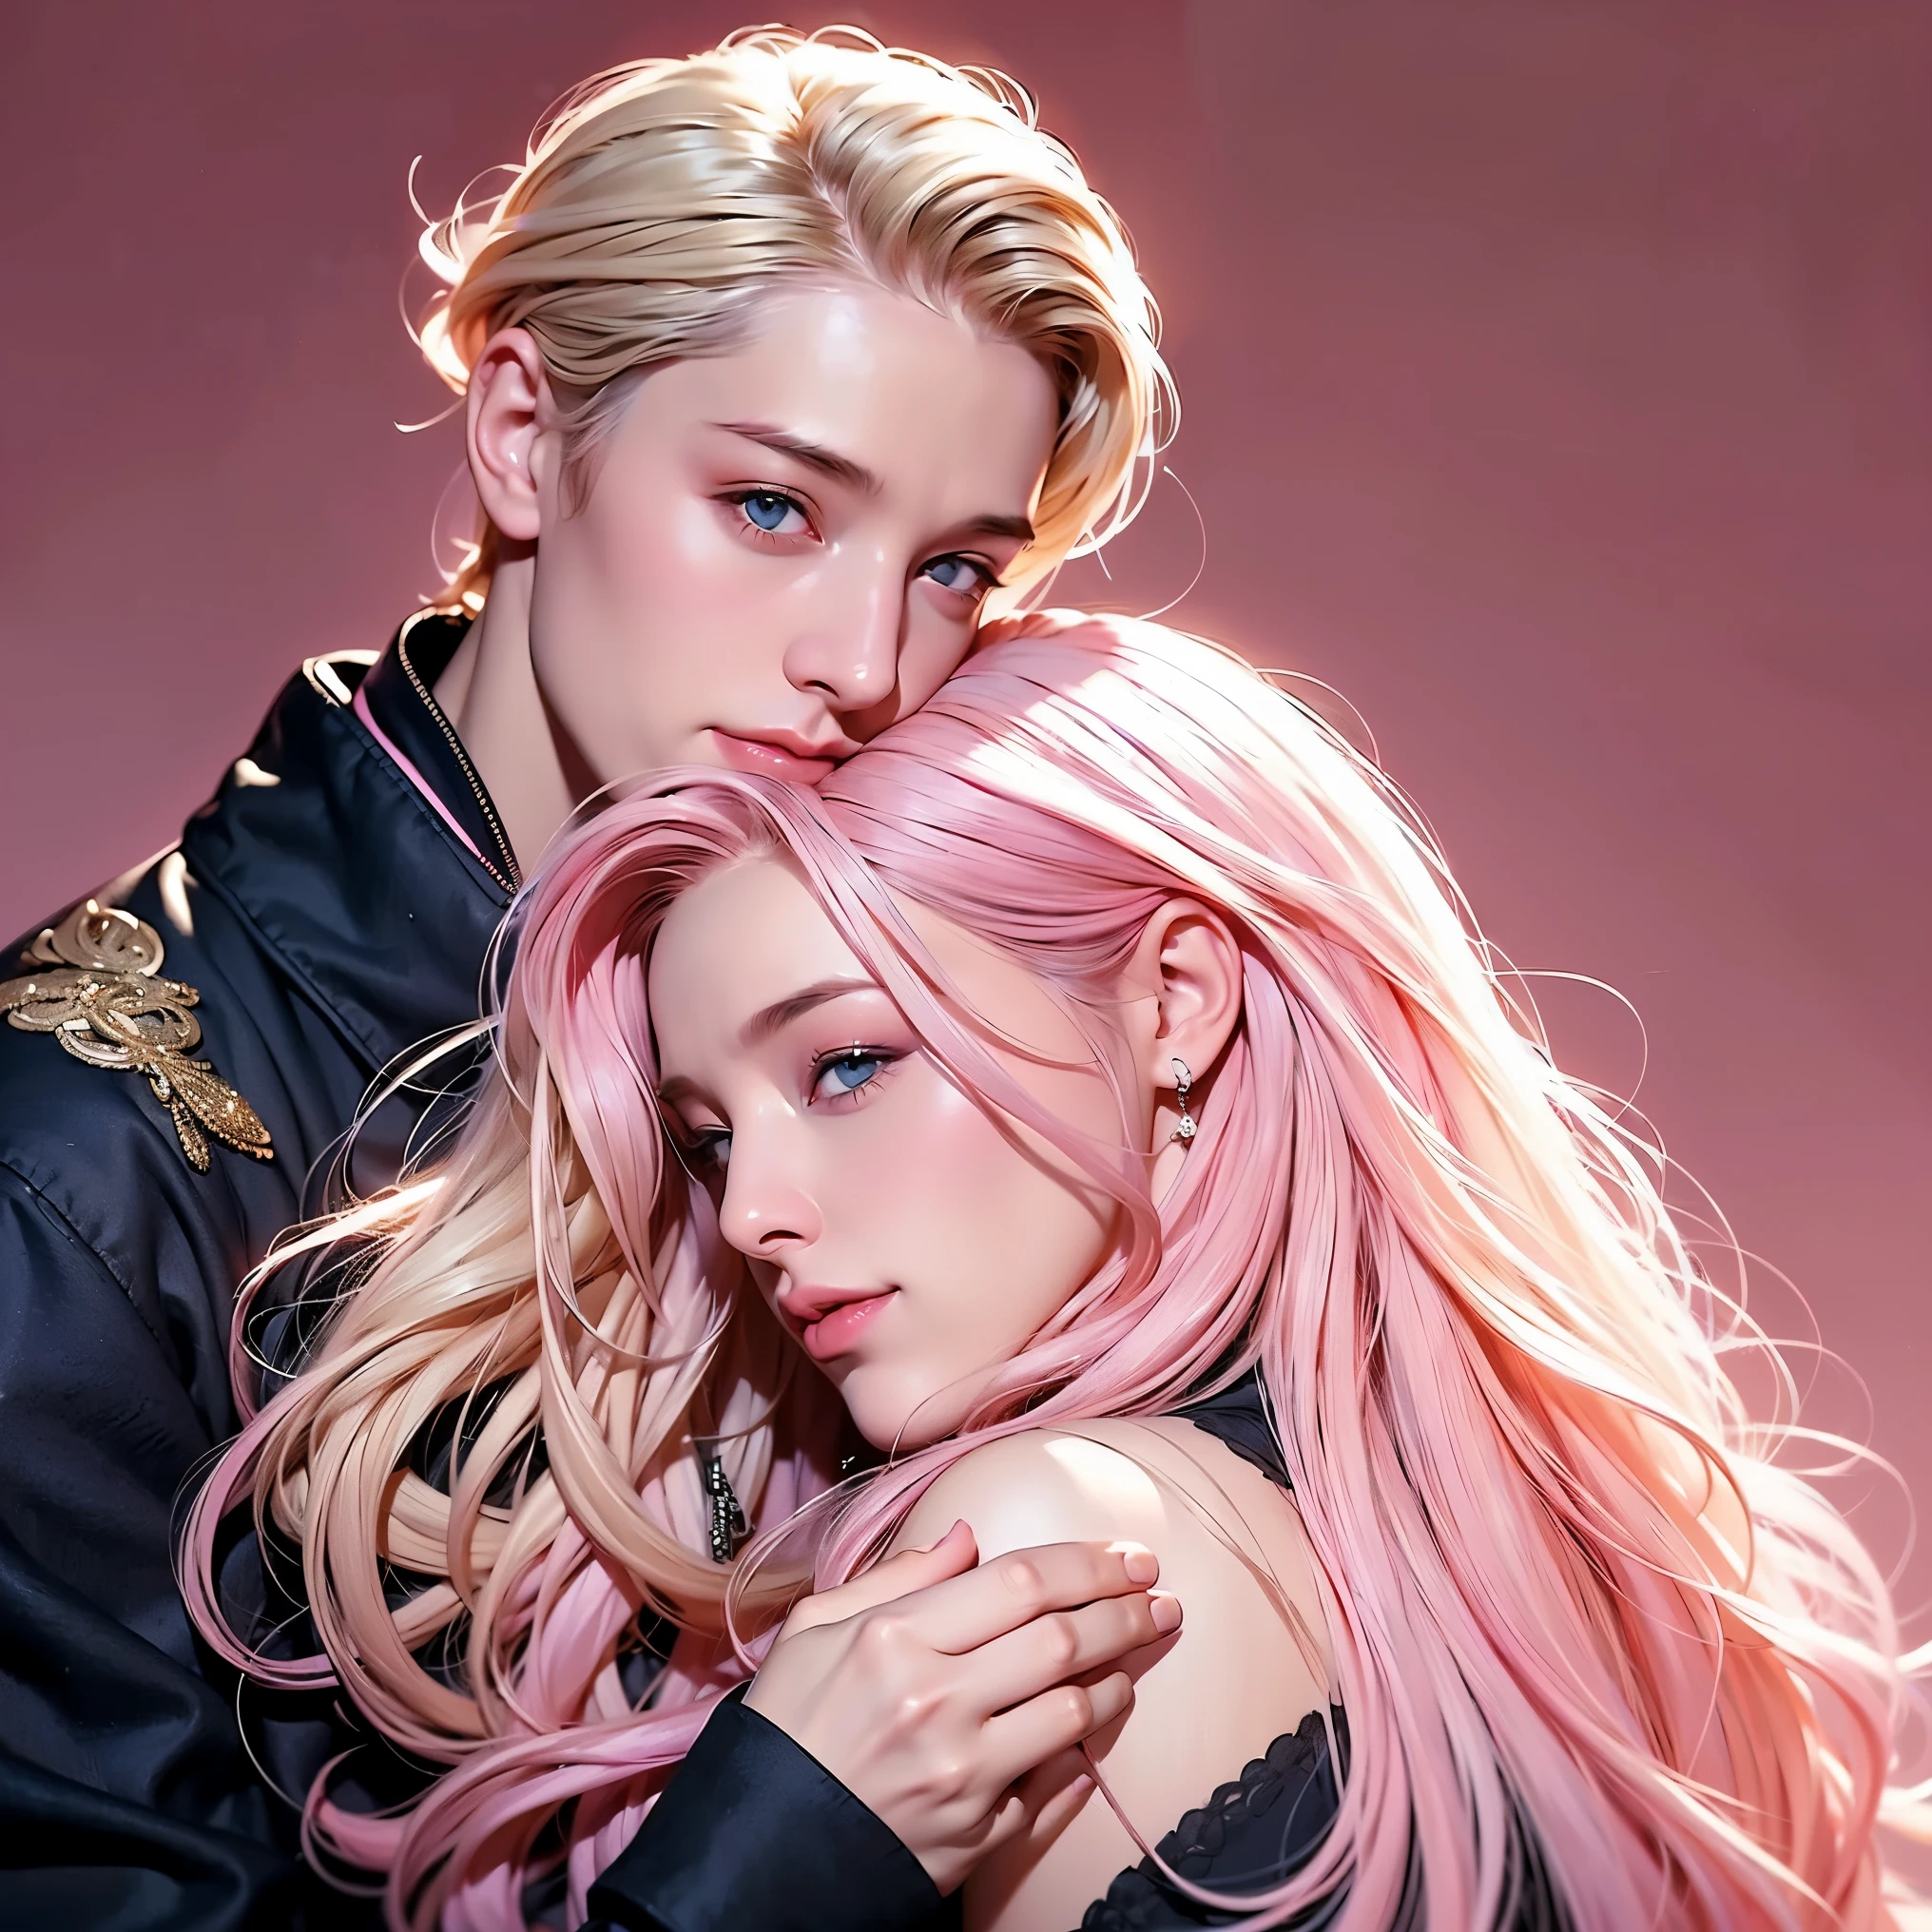  ((Homme, Homme, jeune, Garçon, cheveux courts, cheveux blond, Homme near woHomme)) woHomme, cheveux bouclés et longs cheveux roses, blue eyes WoHomme with pink hair,) two people a Homme and a woHomme) vetements décontractés, ((Only the woHomme with pink hair))((Homme, Homme, cheveux blond, )) scène de parc, sourire, heureux, parc d&#39;attractions, (Homme and woHomme) (woHomme with pink hair) (Homme with cheveux blond)(Homme in black coat) (vêtements simples)( mâle, Homme, Garçon, short cheveux blond, cheveux blond) (woHomme with pink hair)